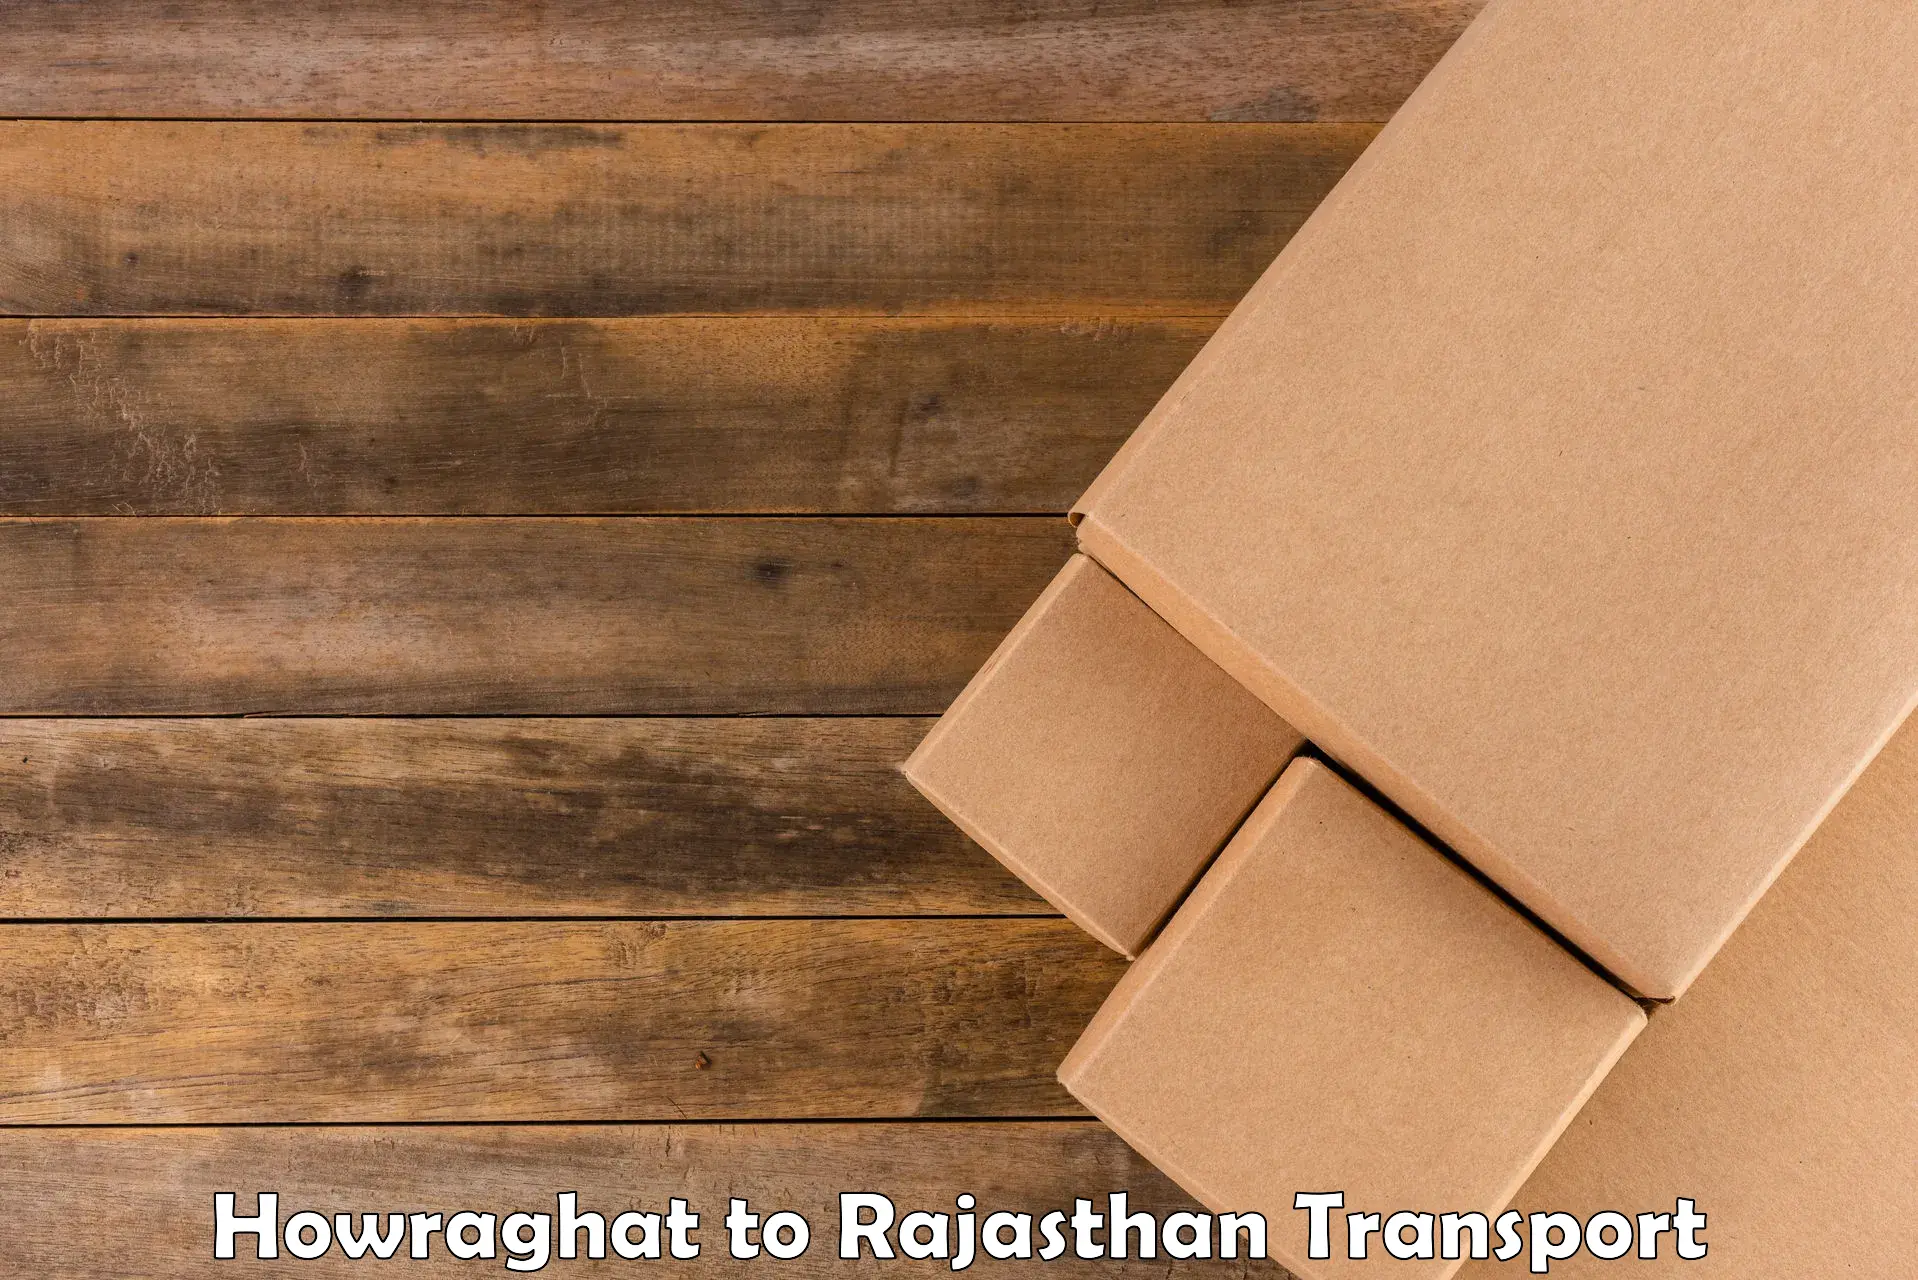 Container transport service in Howraghat to Raisingh Nagar